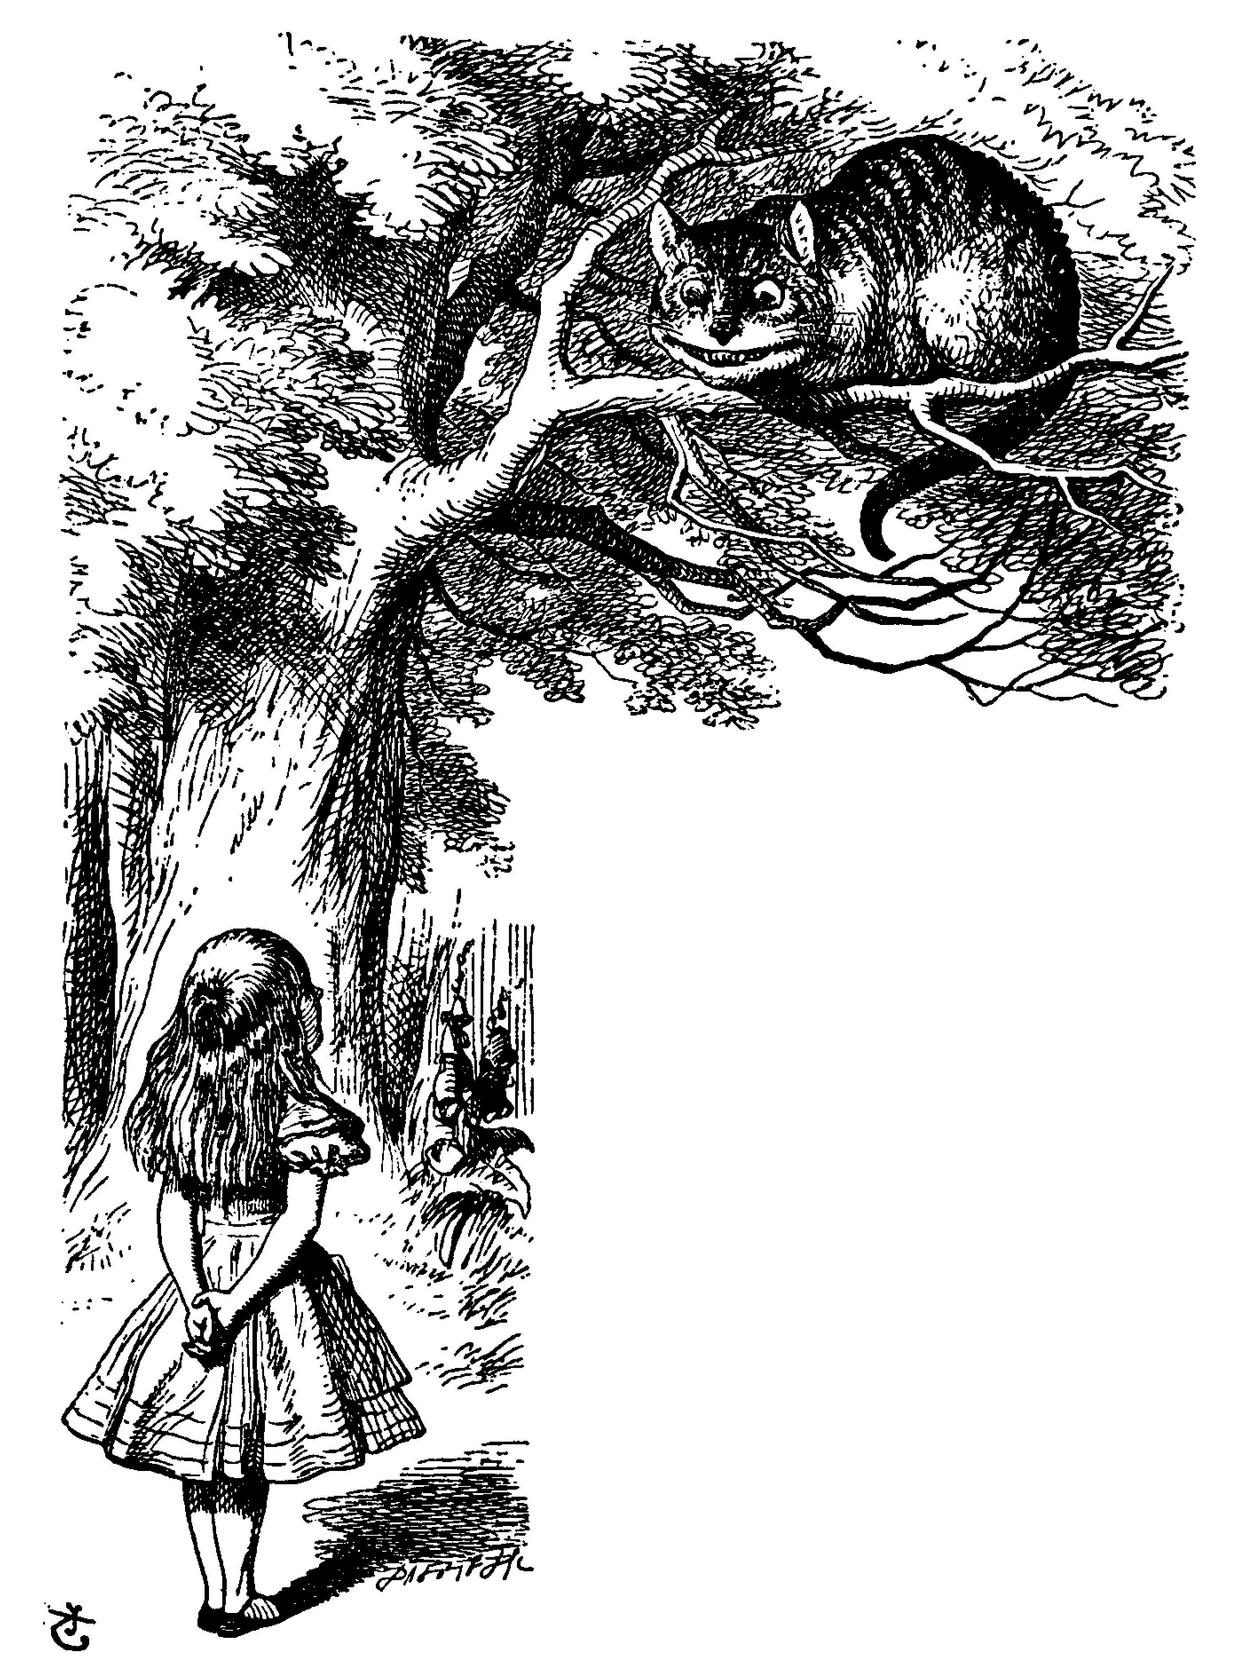 An illustration for the original 1865 edition of Alice's Adventures in Wonderland.